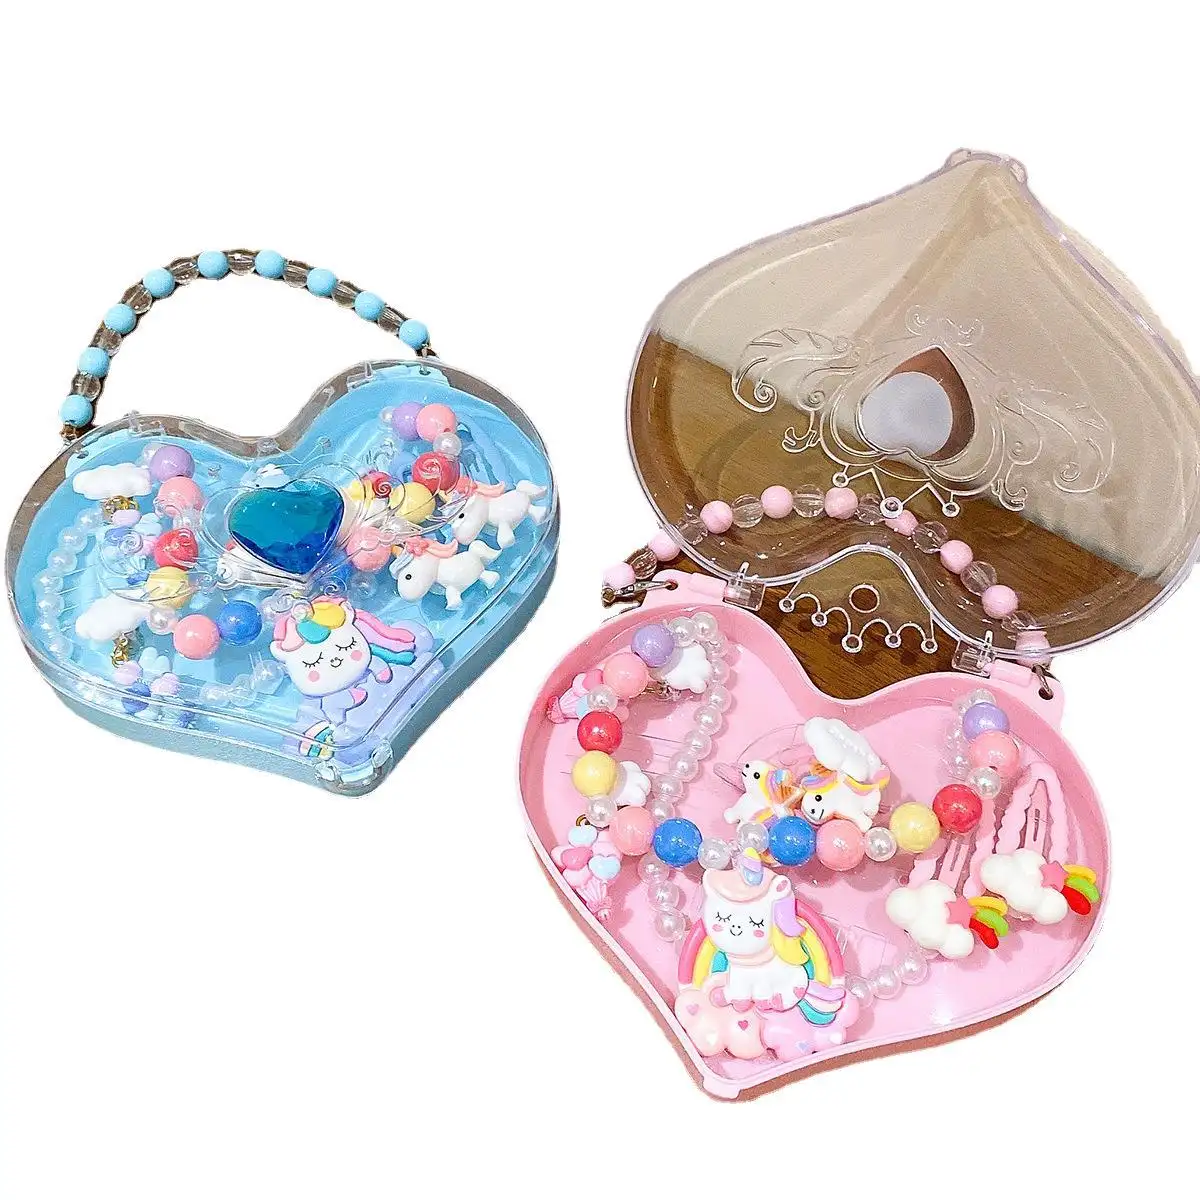 Botu Children's Jewelry Set Hairpin Earrings Necklace Ring Heart Carrying Box Little Girl Princess Hair Ties Accessories